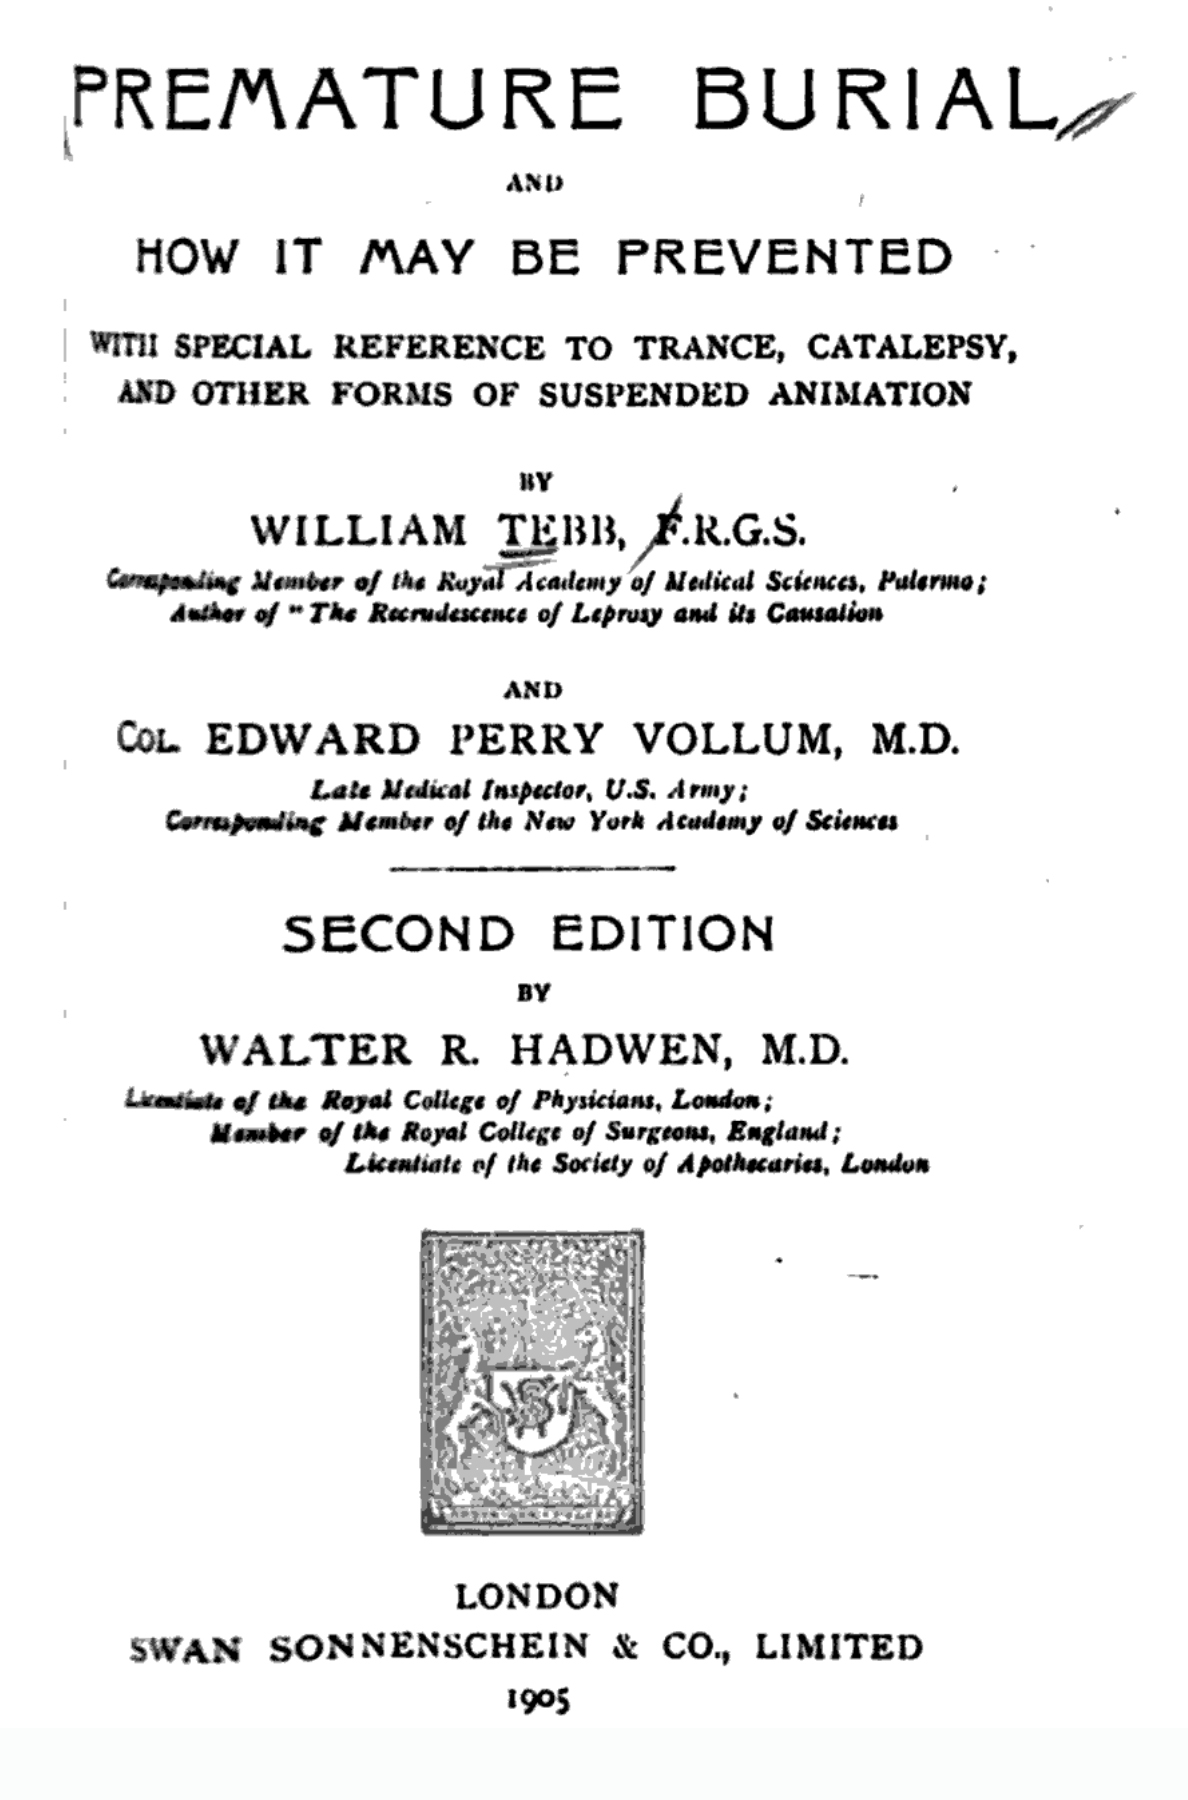 Premature Burial title page from the second edition, 1905.